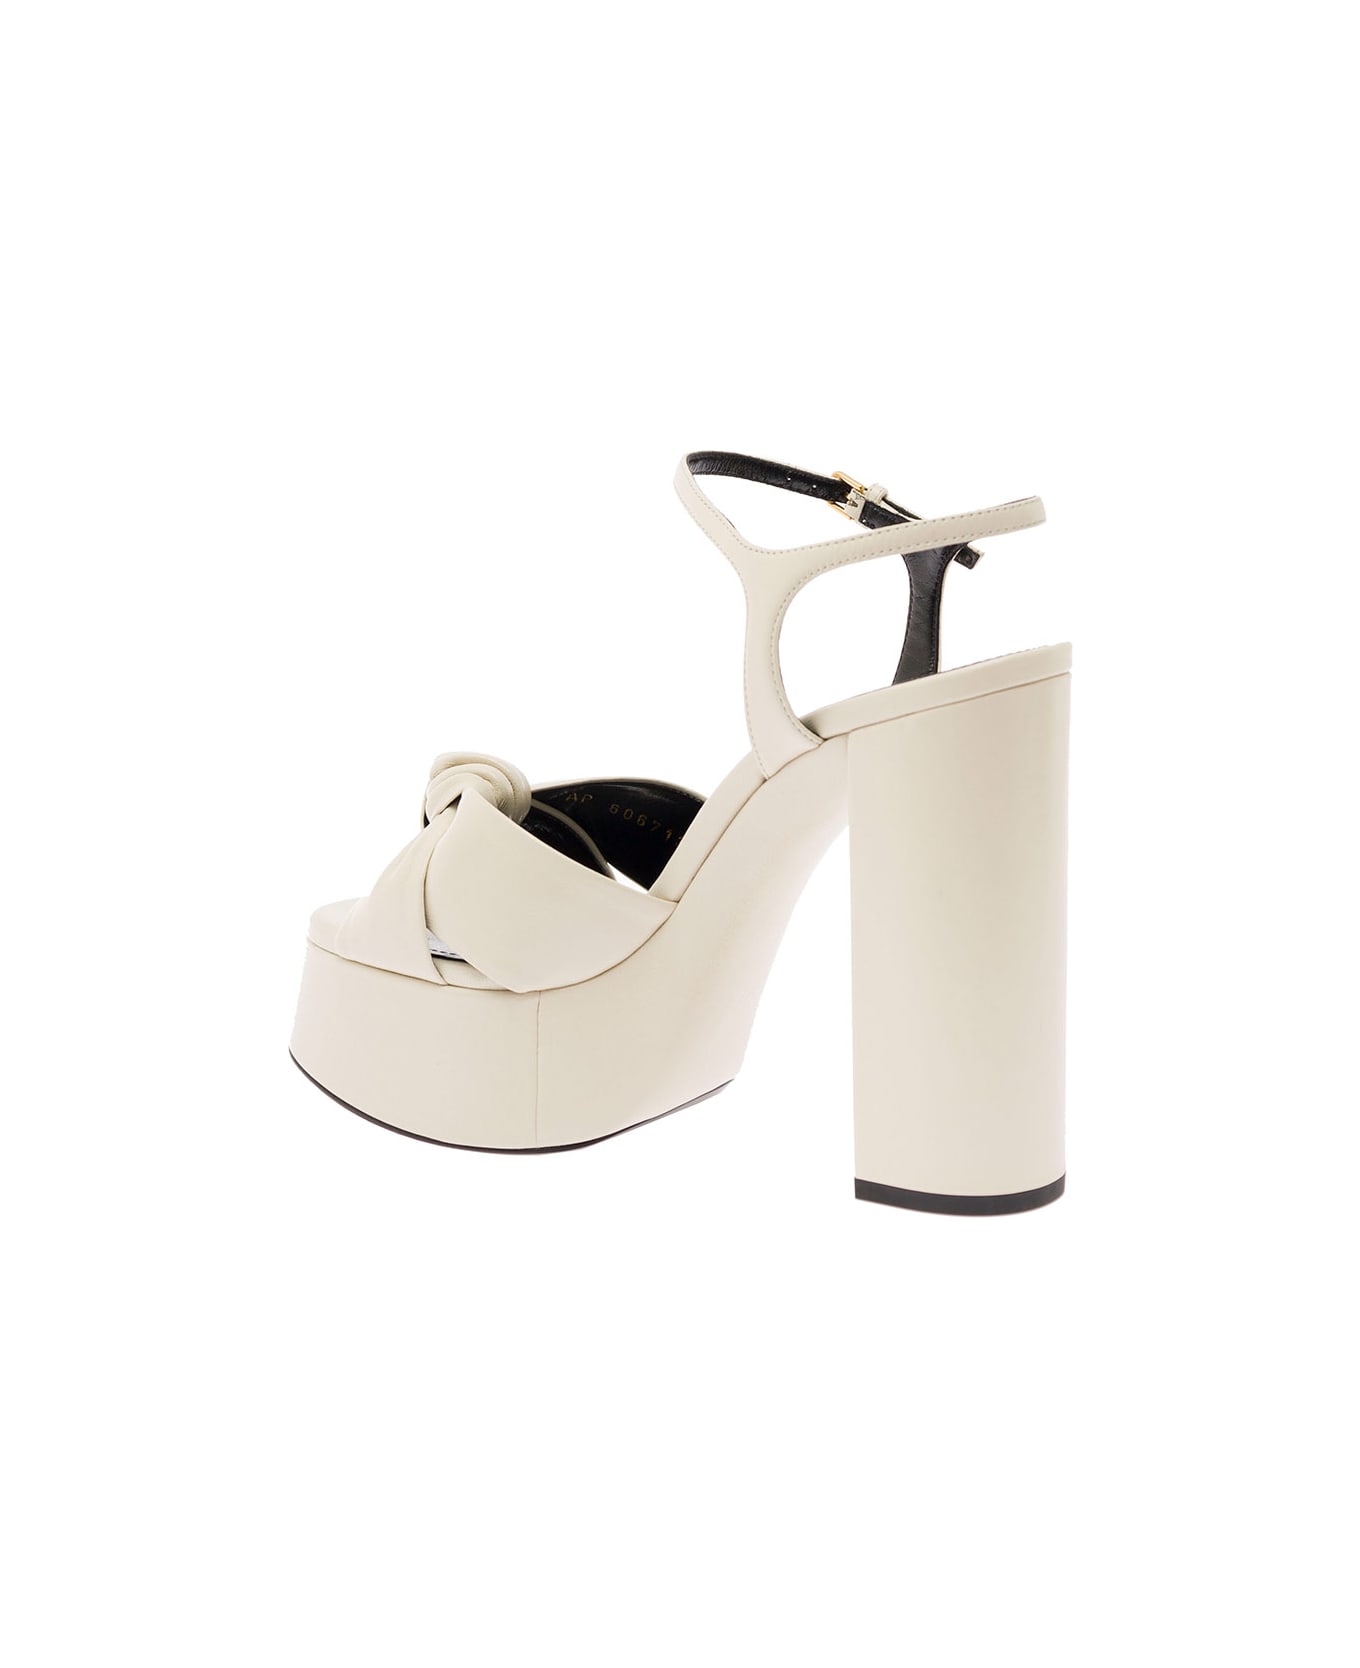 Saint Laurent Bianca White Platform Sandals In Smooth Leather Woman - White